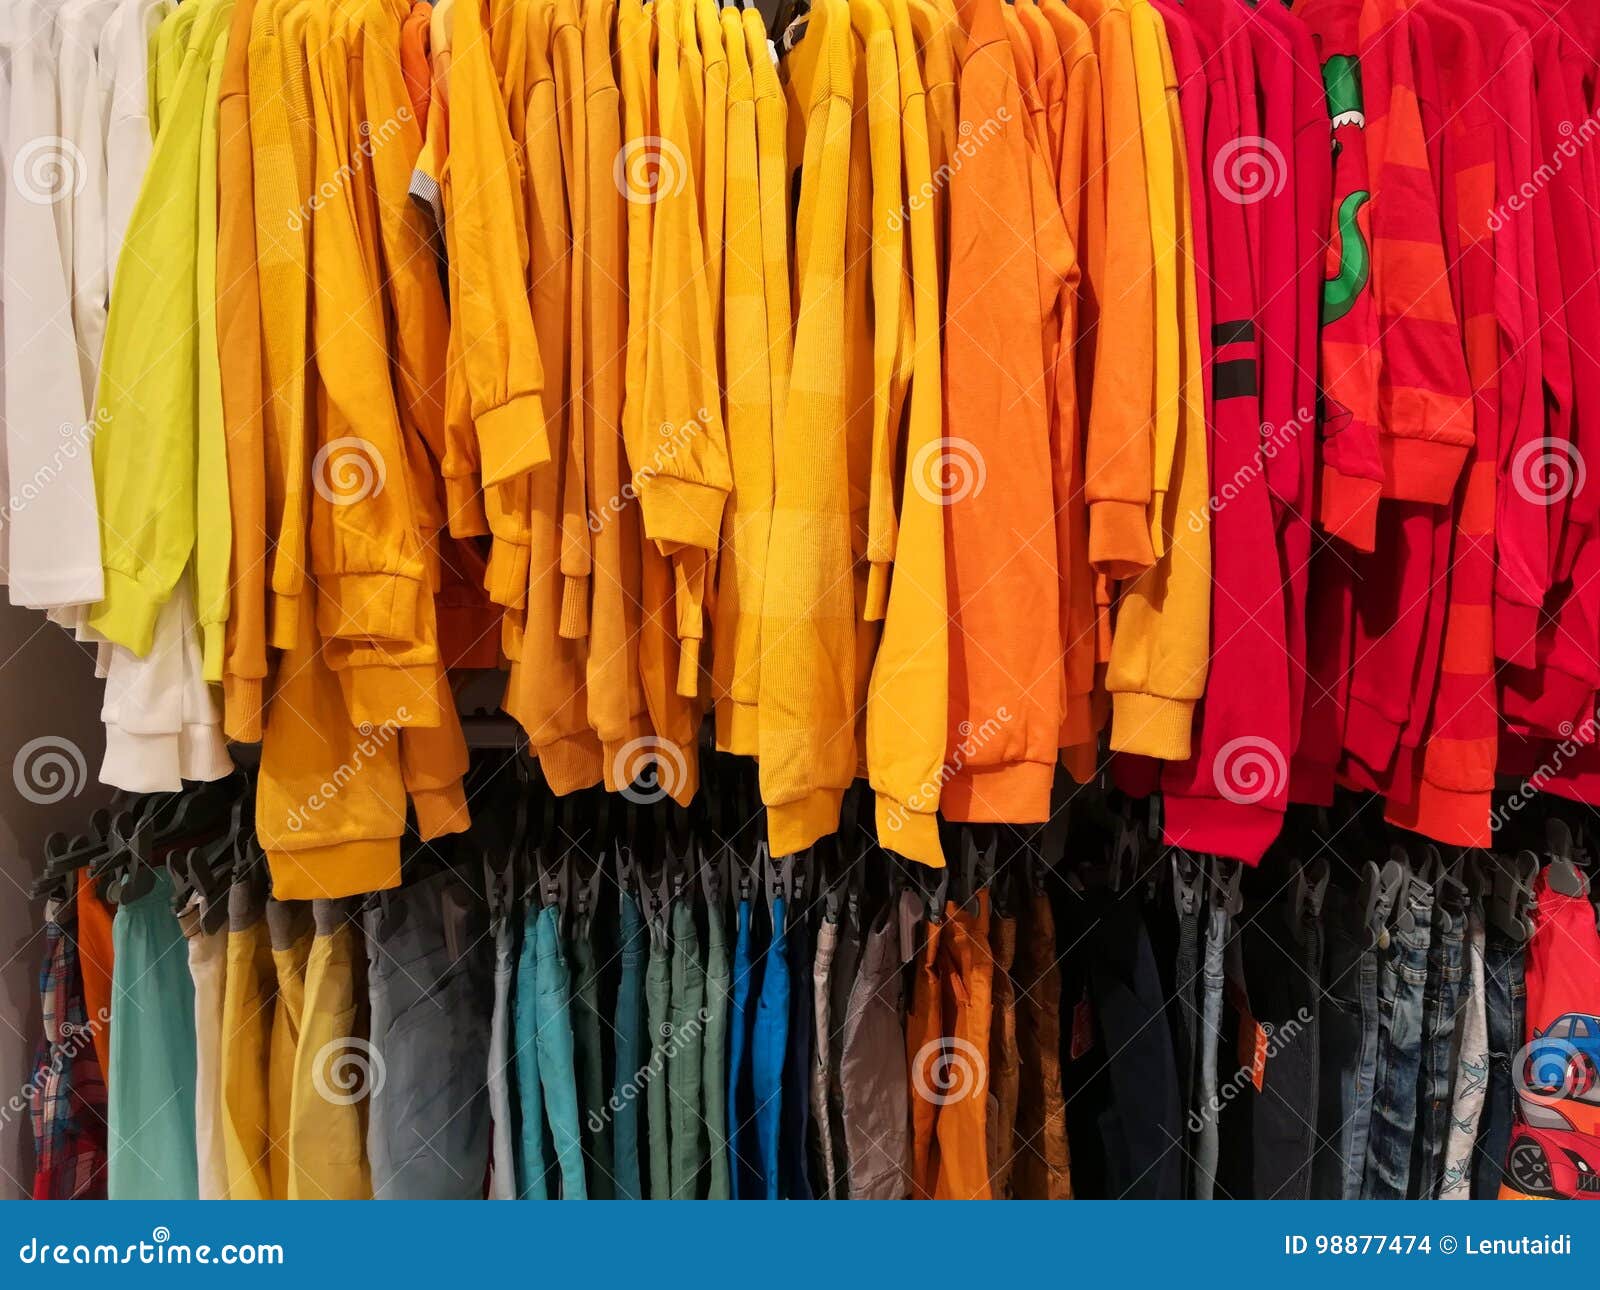 Hanging clothes editorial stock image. Image of choice - 98877474